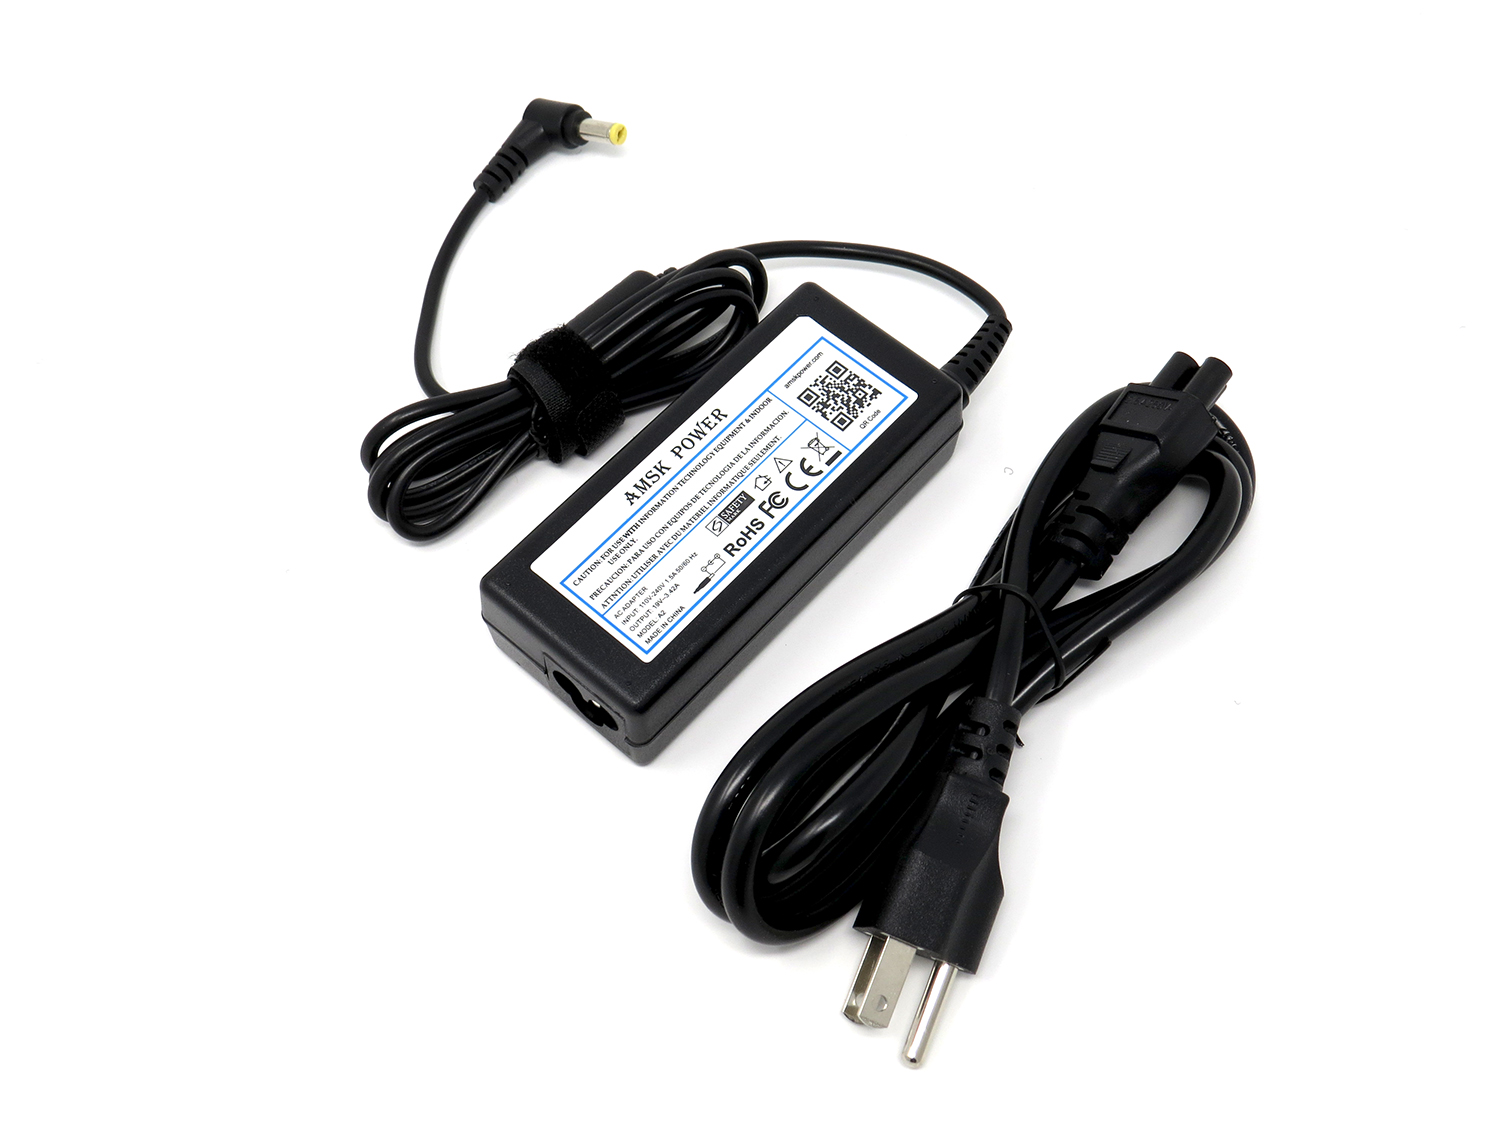 Ac Adapter for Acer Aspire 5002WLMi - image 1 of 3